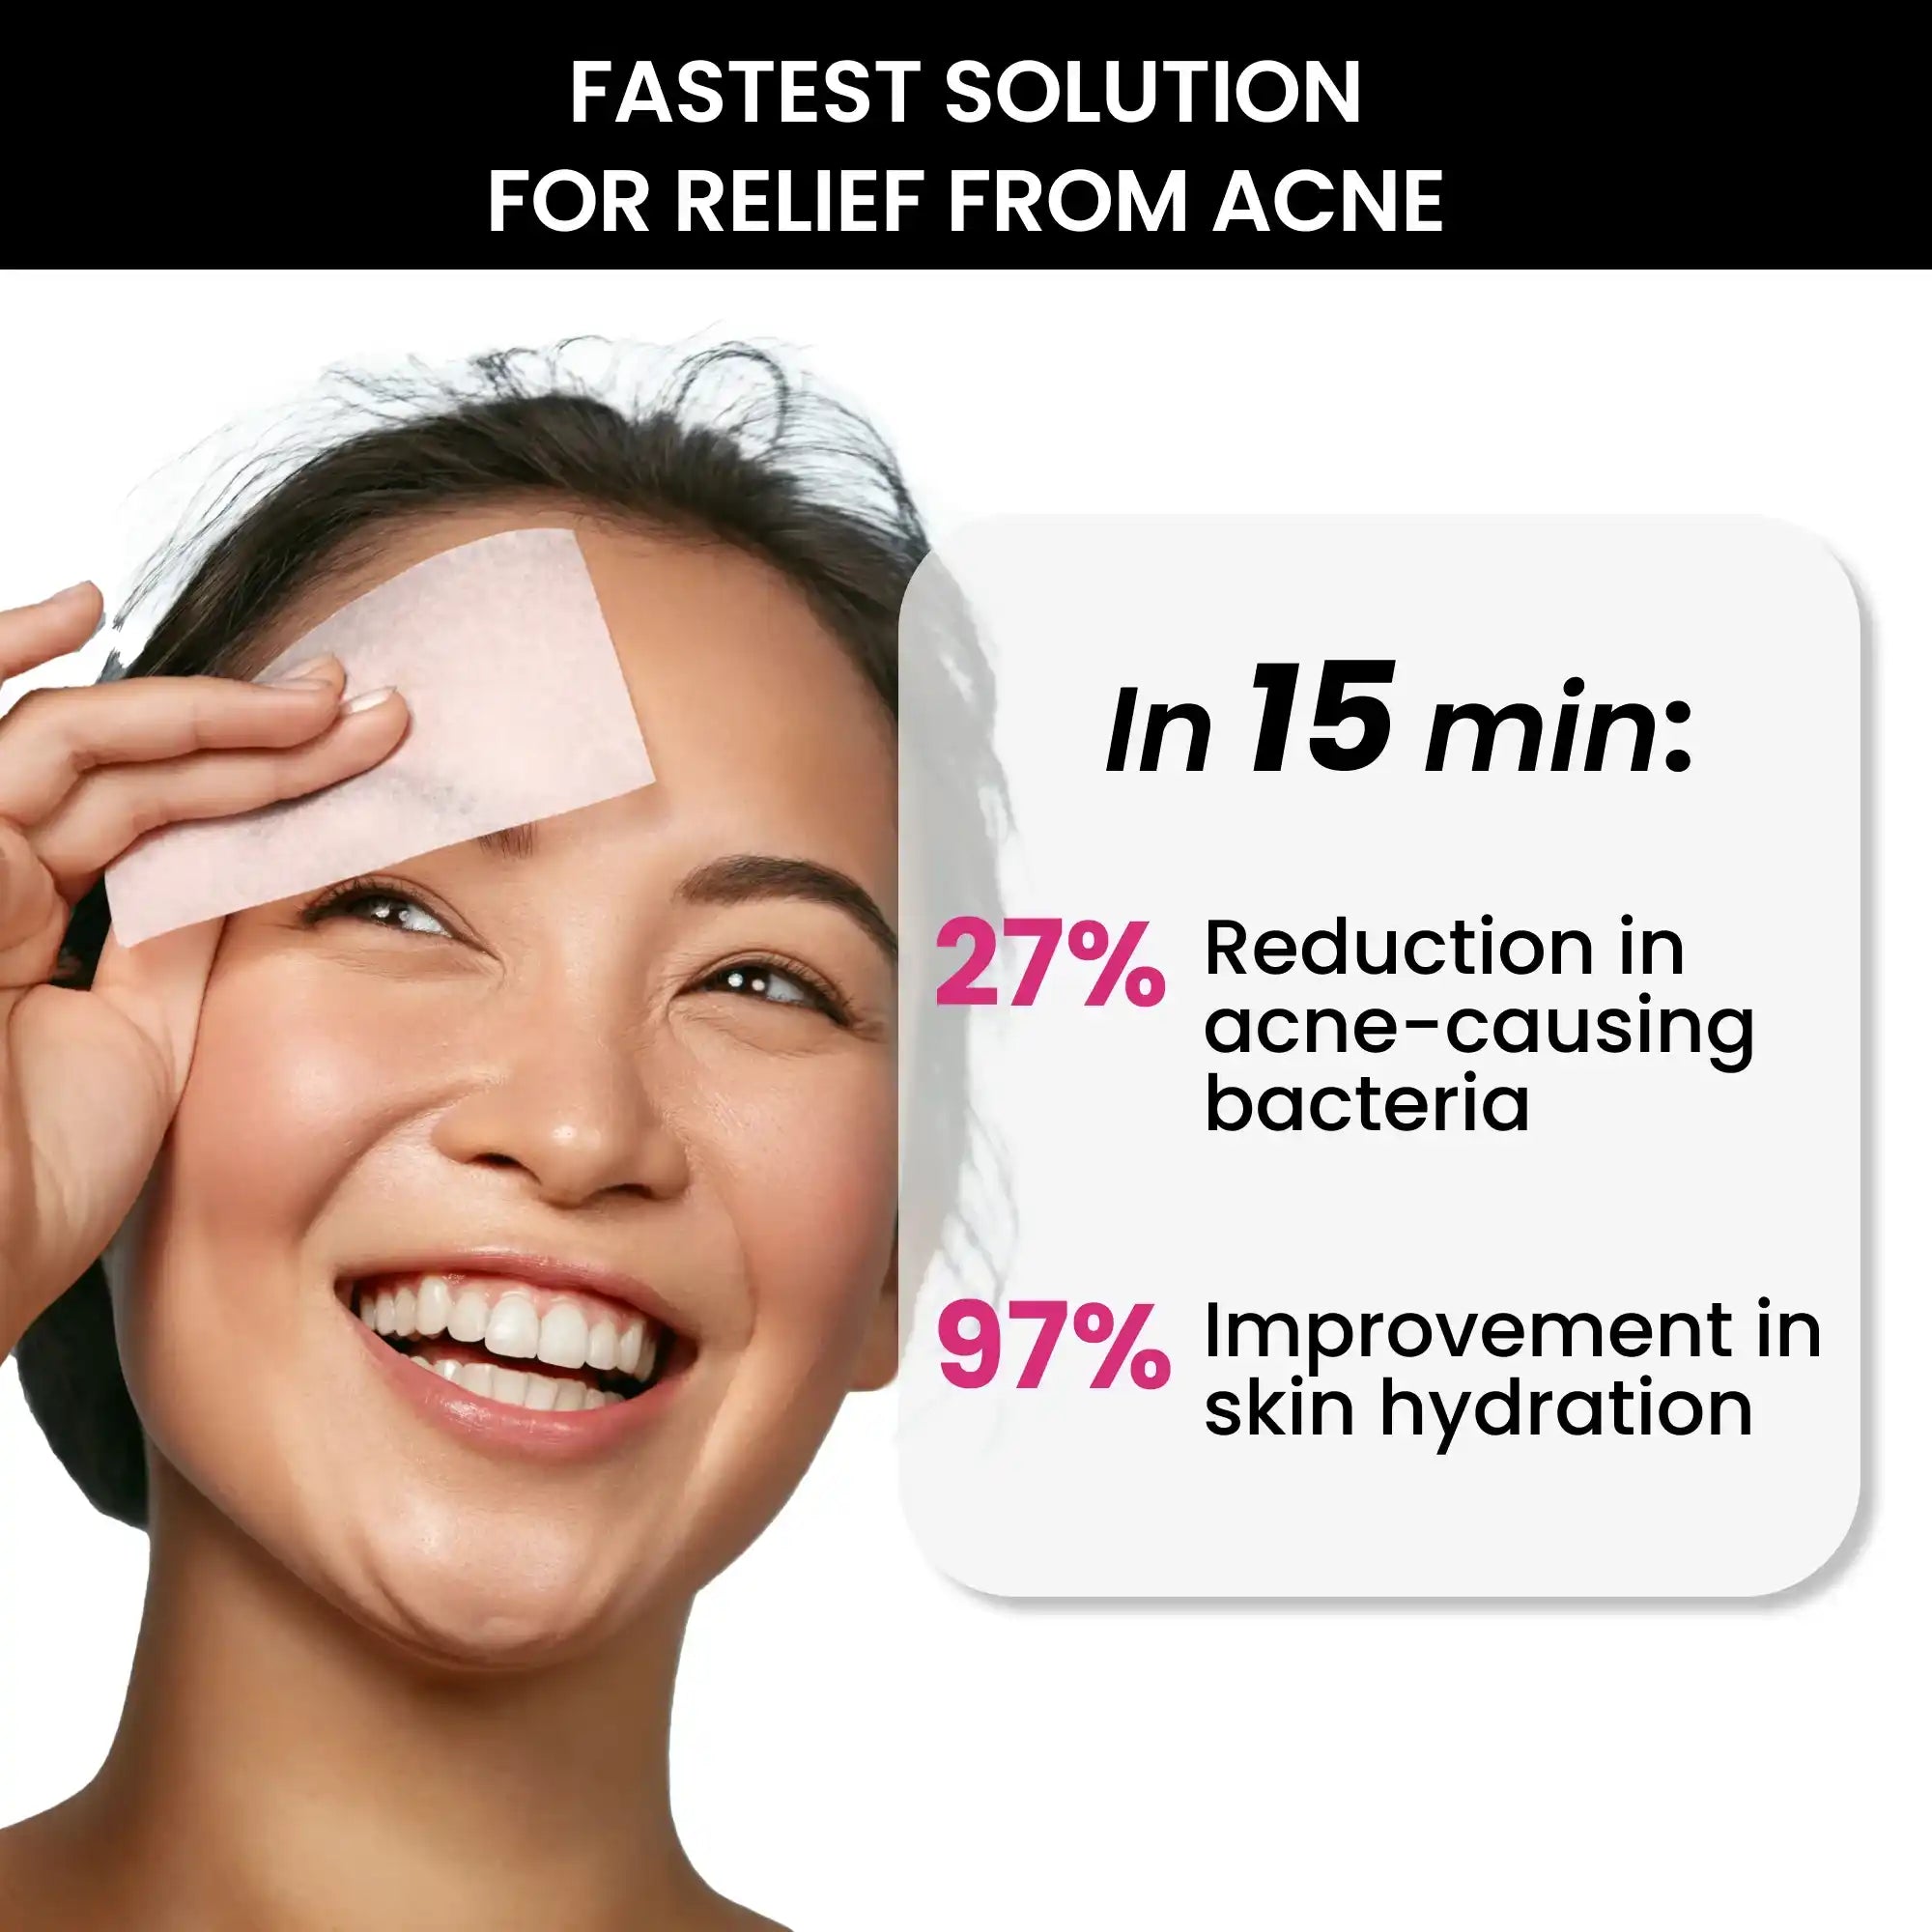 ThriveCo Goodbye Acne Kit is the fastest solution for acne relief